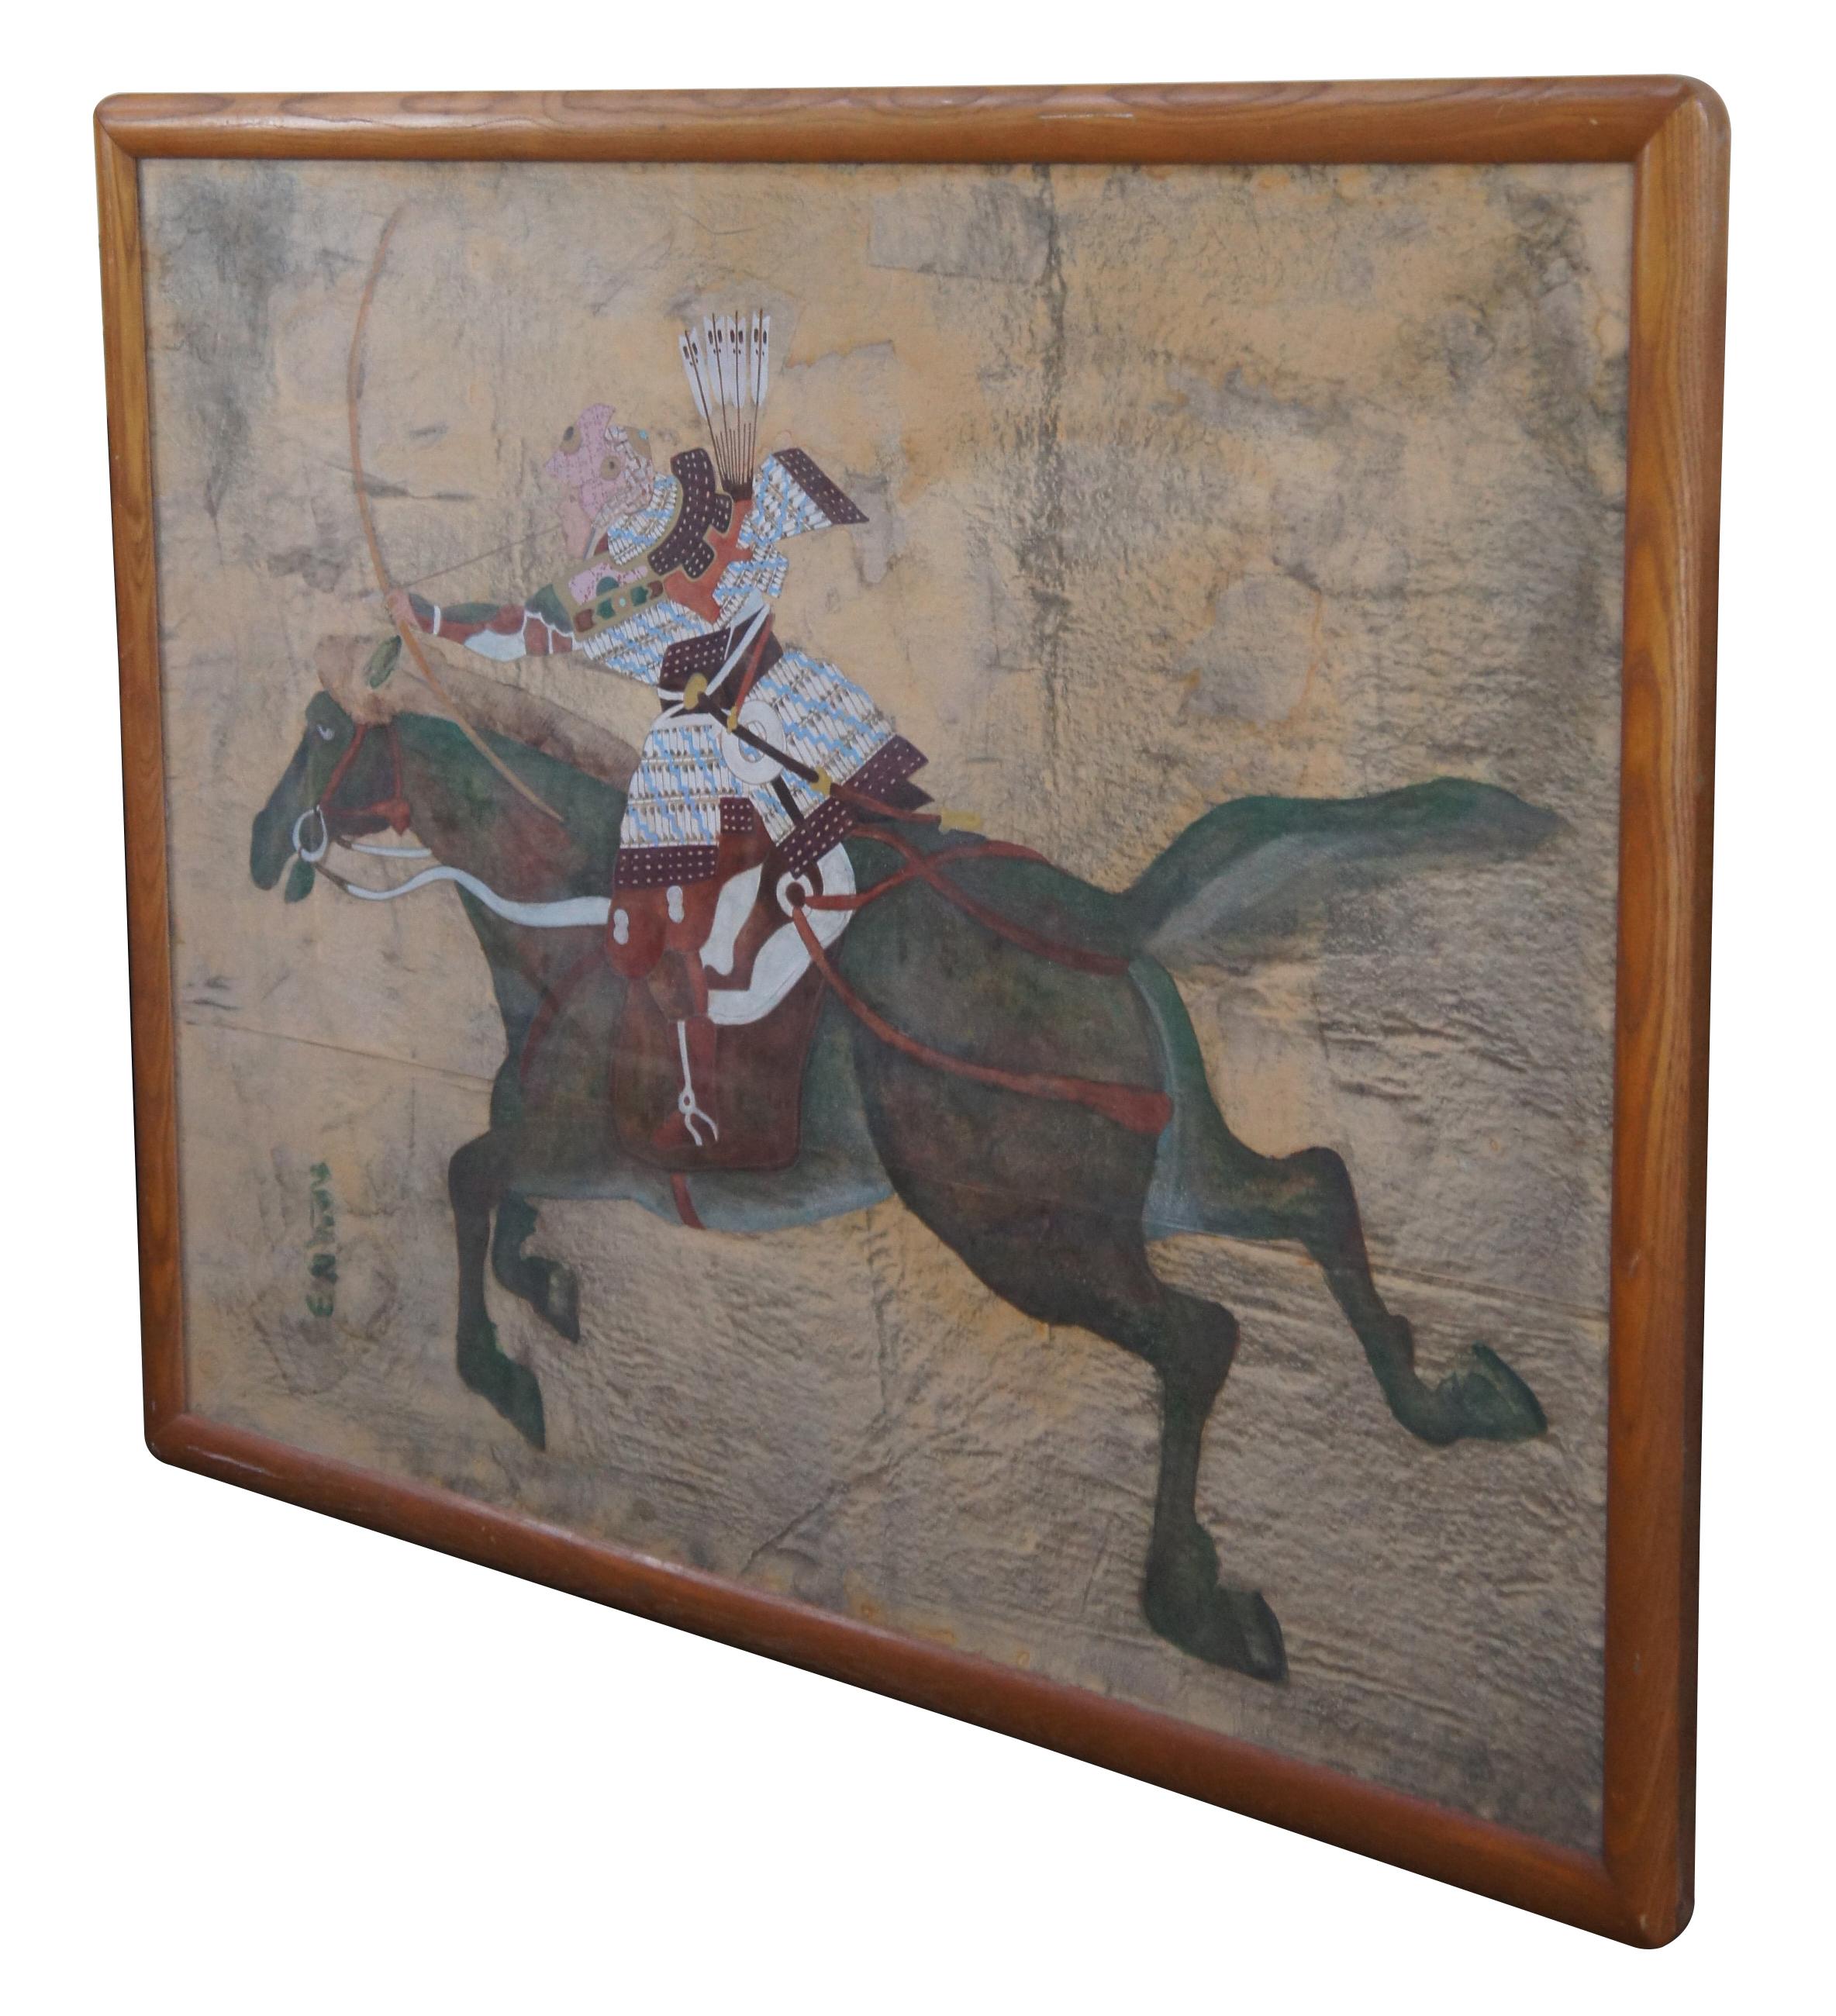 Monumental antique Japanese imperial hunt / war / battle watercolor painting of Minamoto on Horseback. The Samurai warrior Minamoto is shown with his equestrian prowess, in full armor riding his horse about to fire his bamboo bow. One of the stories